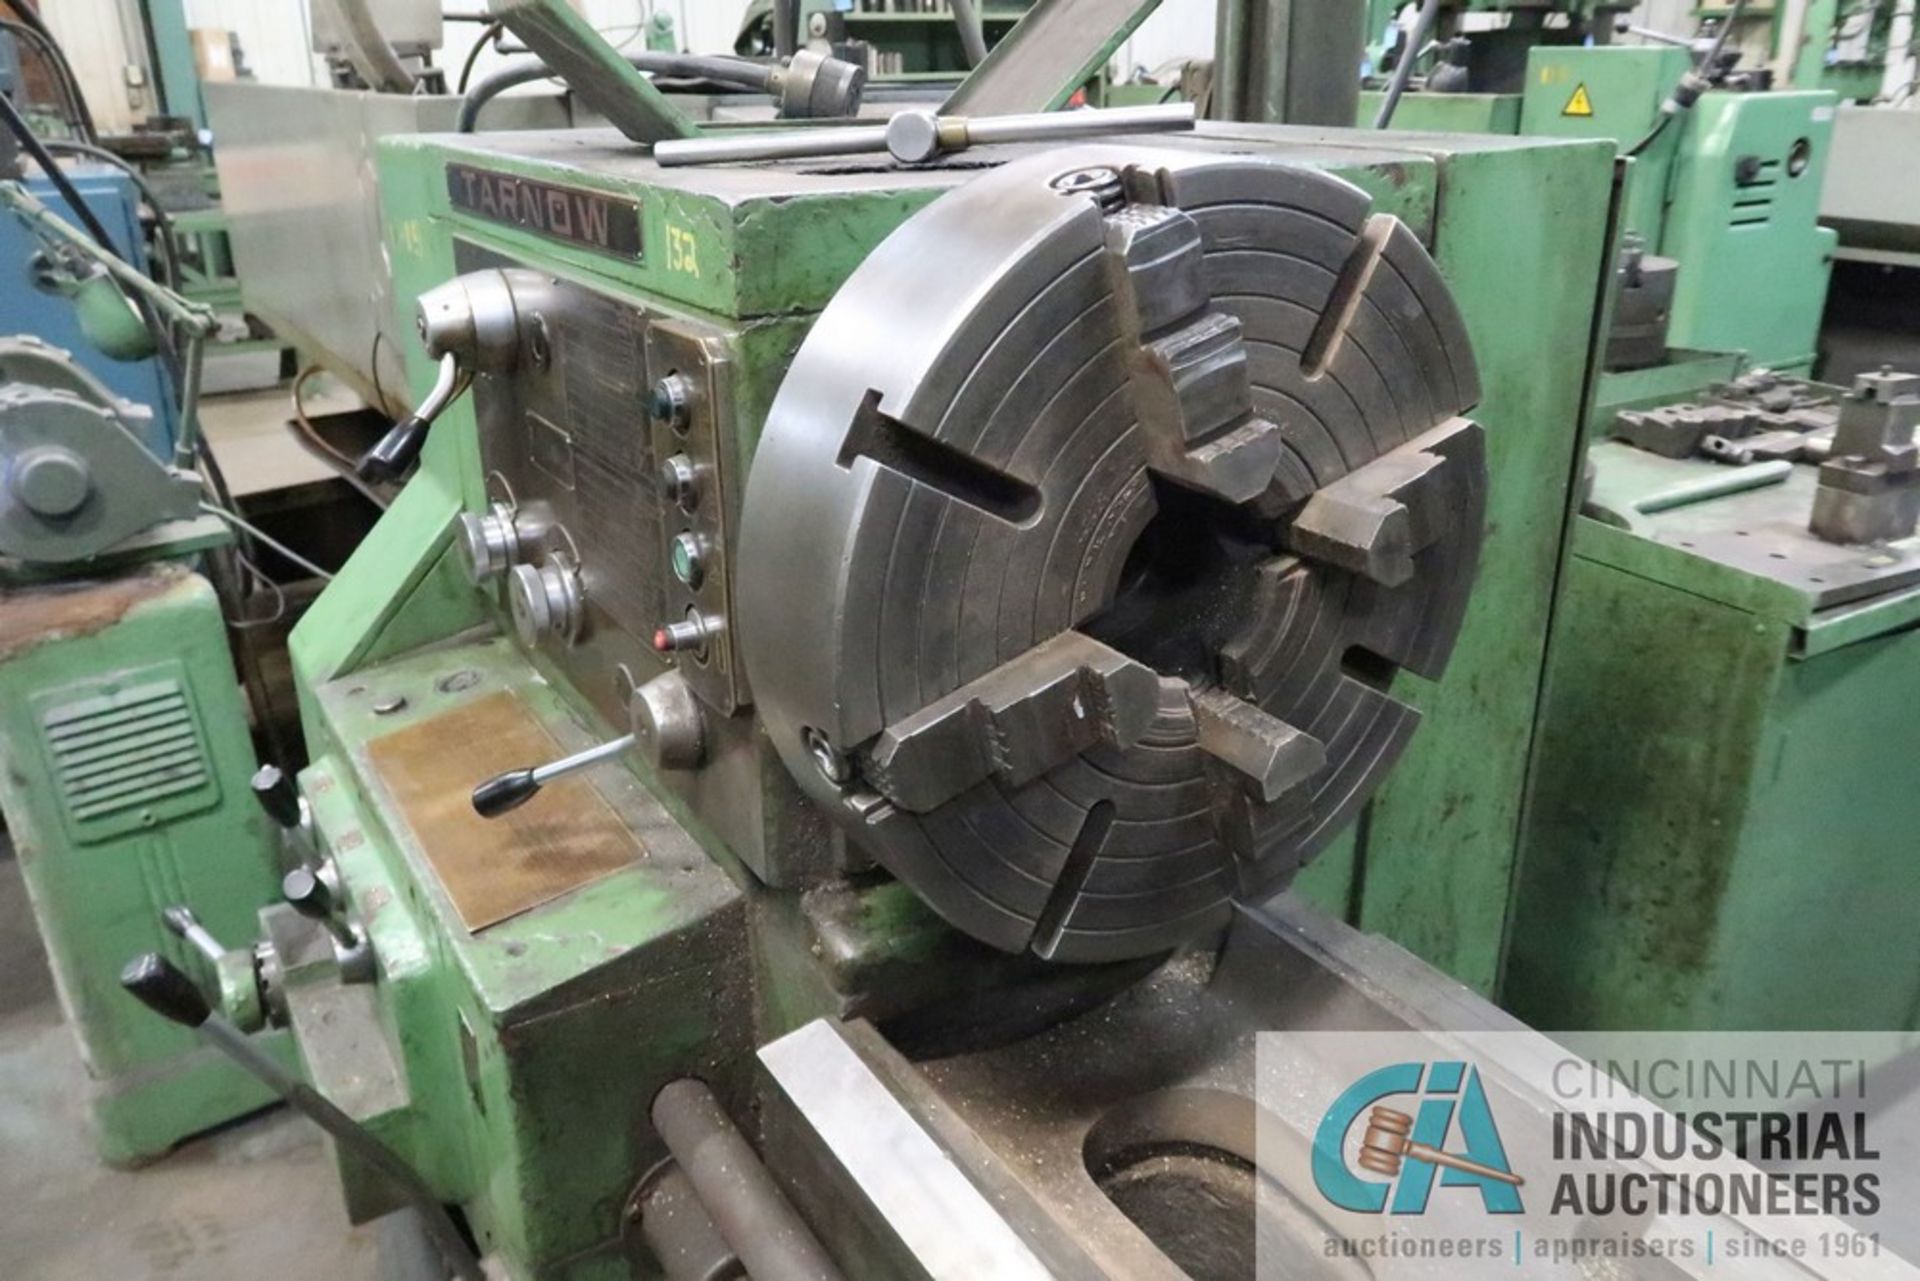 20" X 132" TARNOW ENGINE LATHE; S/N 7667881, 2" SPINDLE HOLE, 16" 4-JAW CHUCK, STEADY REST, - Image 9 of 14